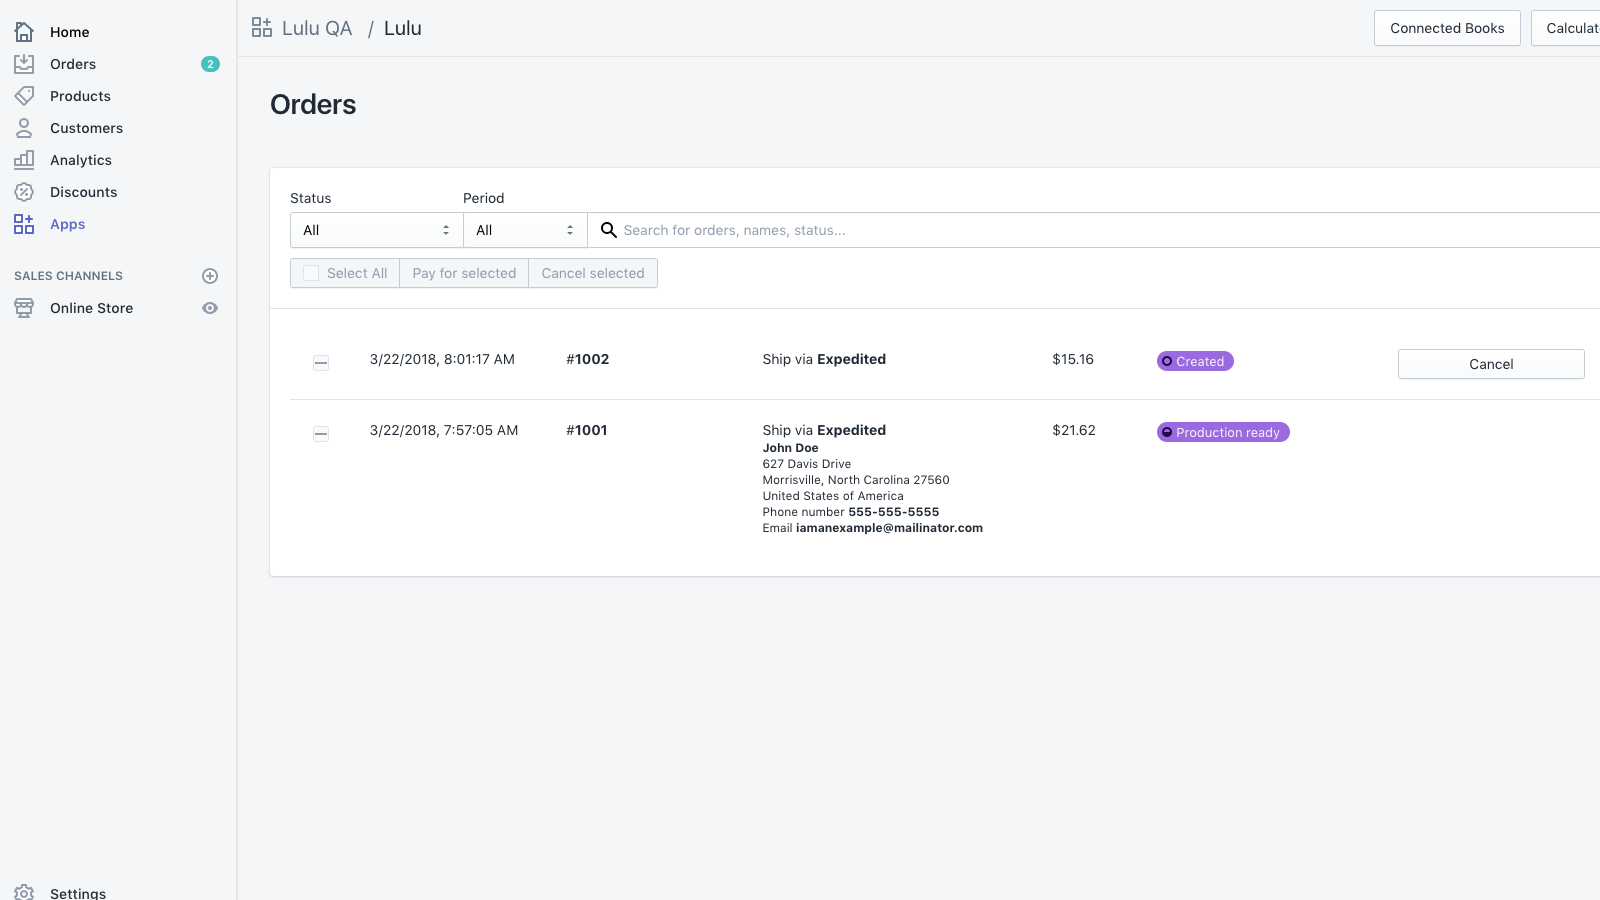 manage orders and fulfillment with Lulu Direct